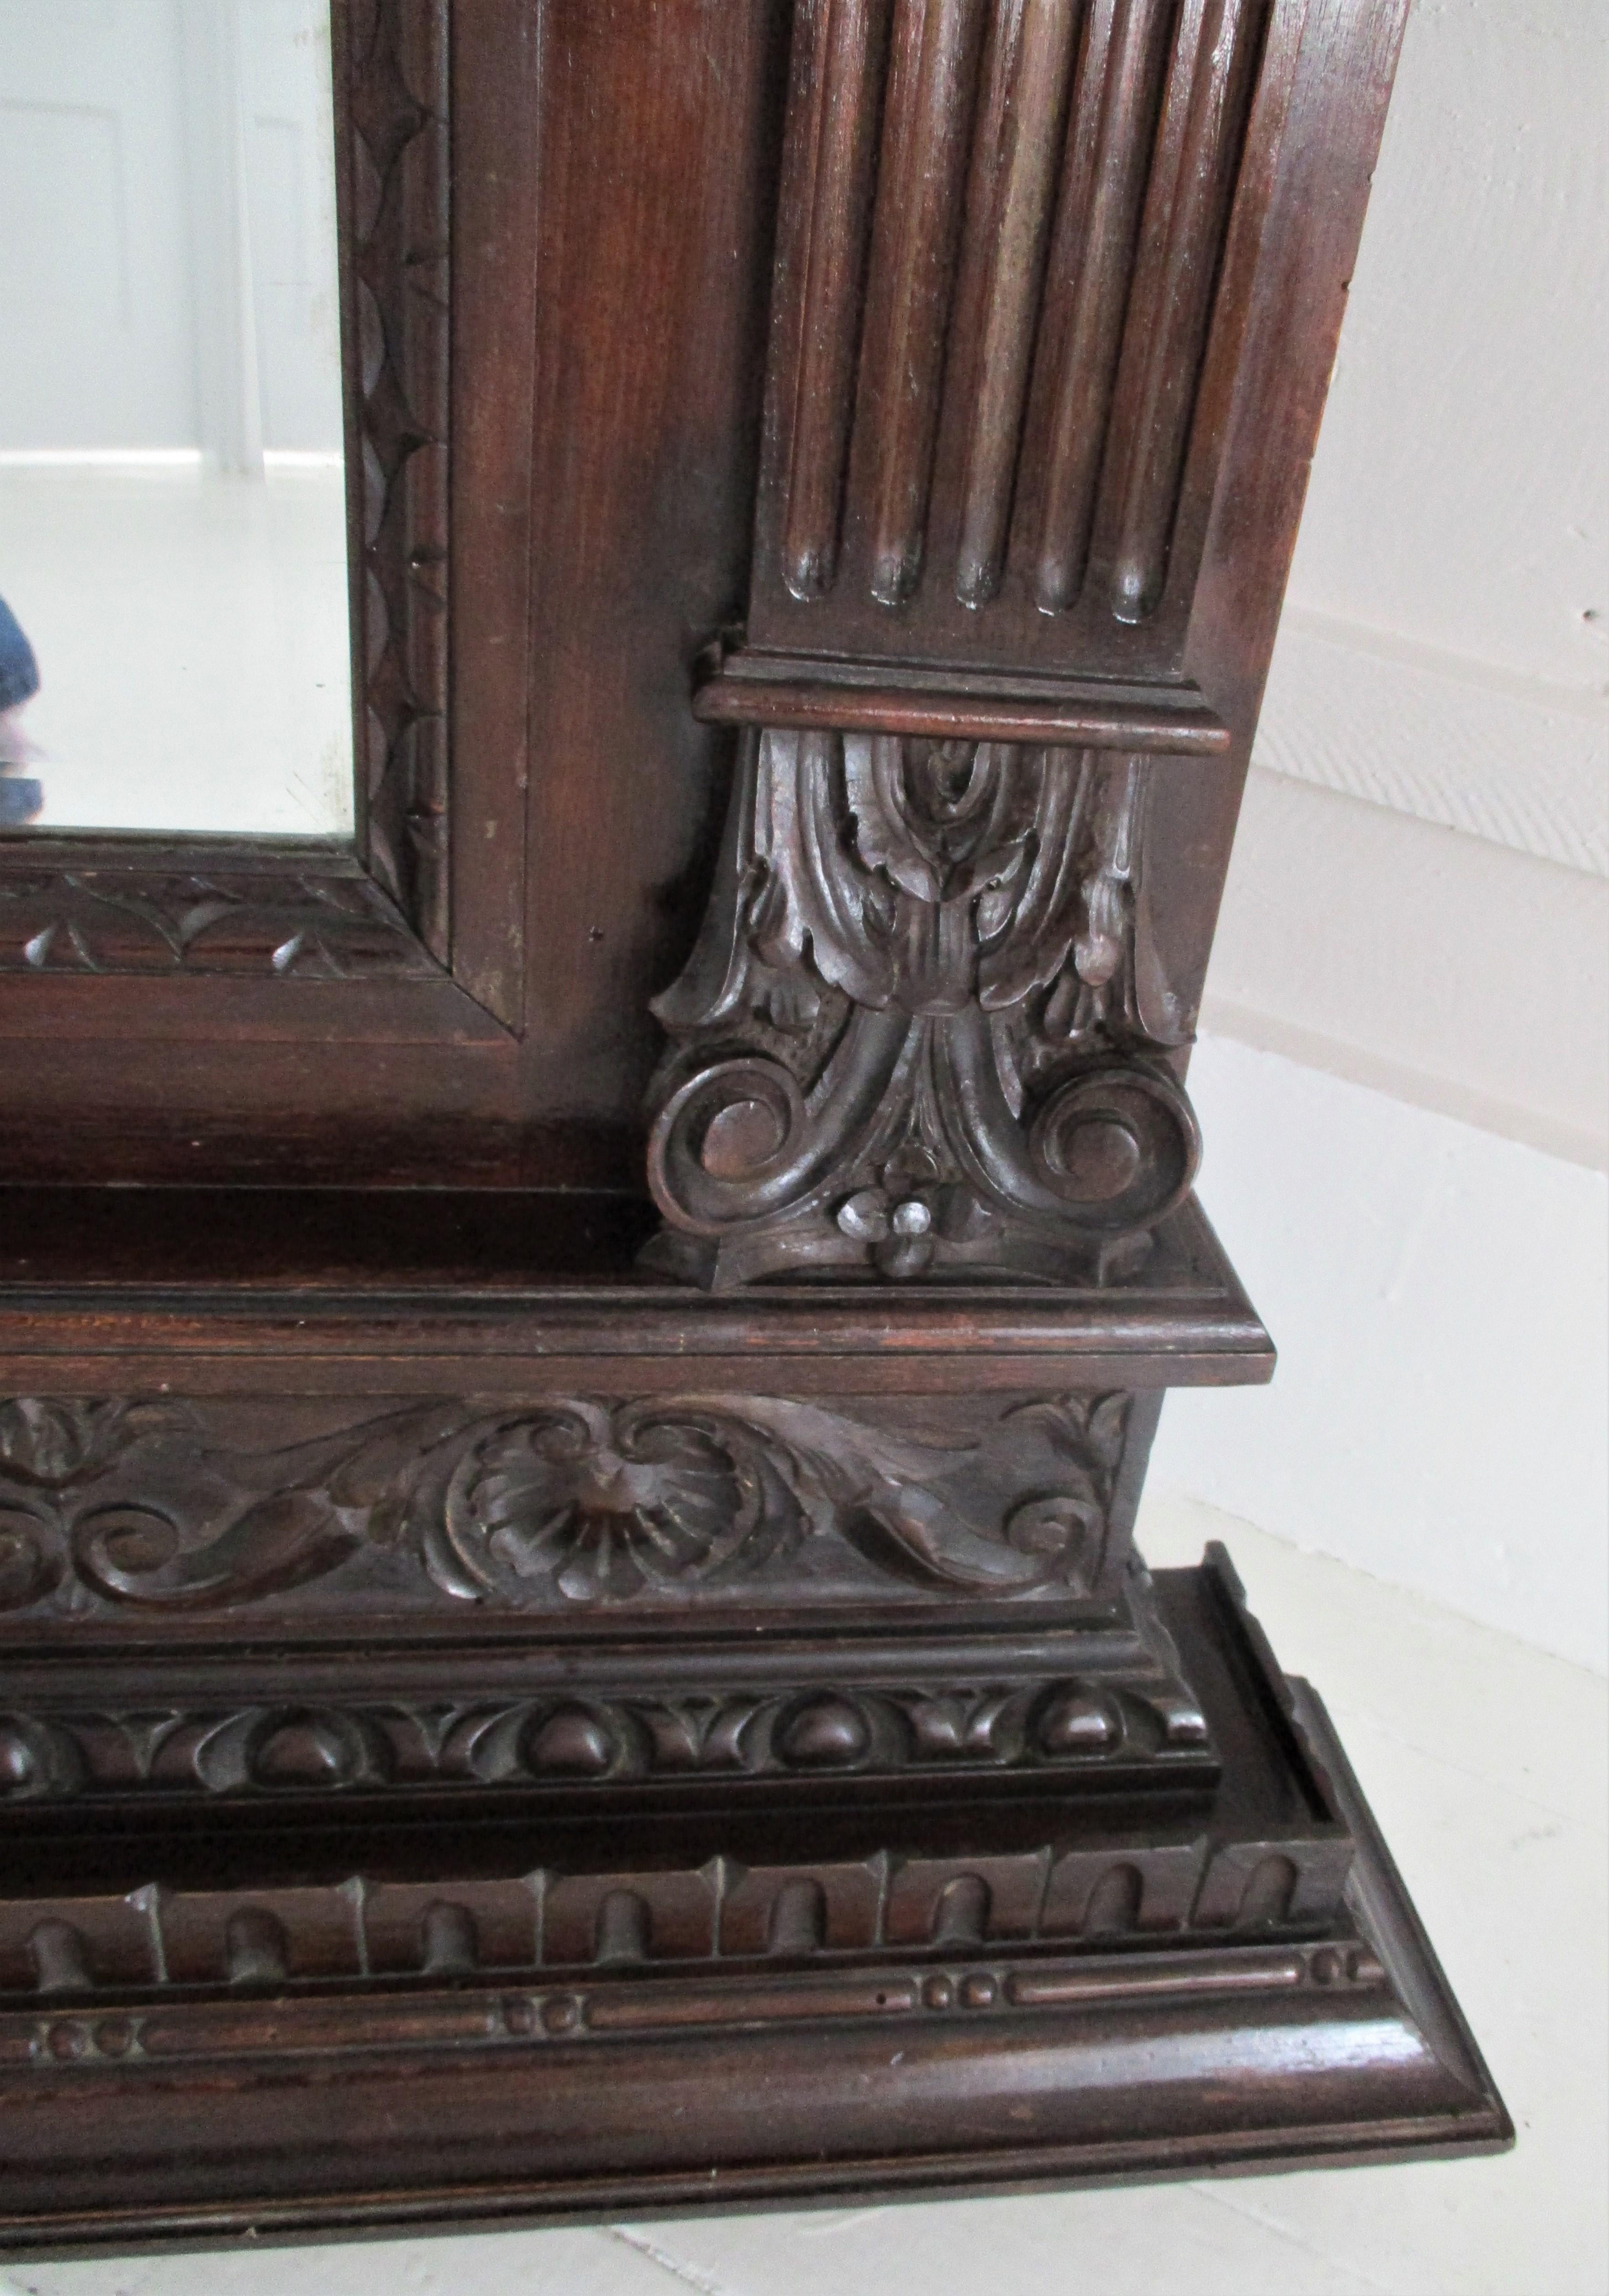 A handsome 19th century neoclassical Italian carved walnut mantel mirror is elegantly carved throughout and comes with a beautiful beveled mirror. This versatile mirror would work great above a fireplace, credenza, commode, buffet or console